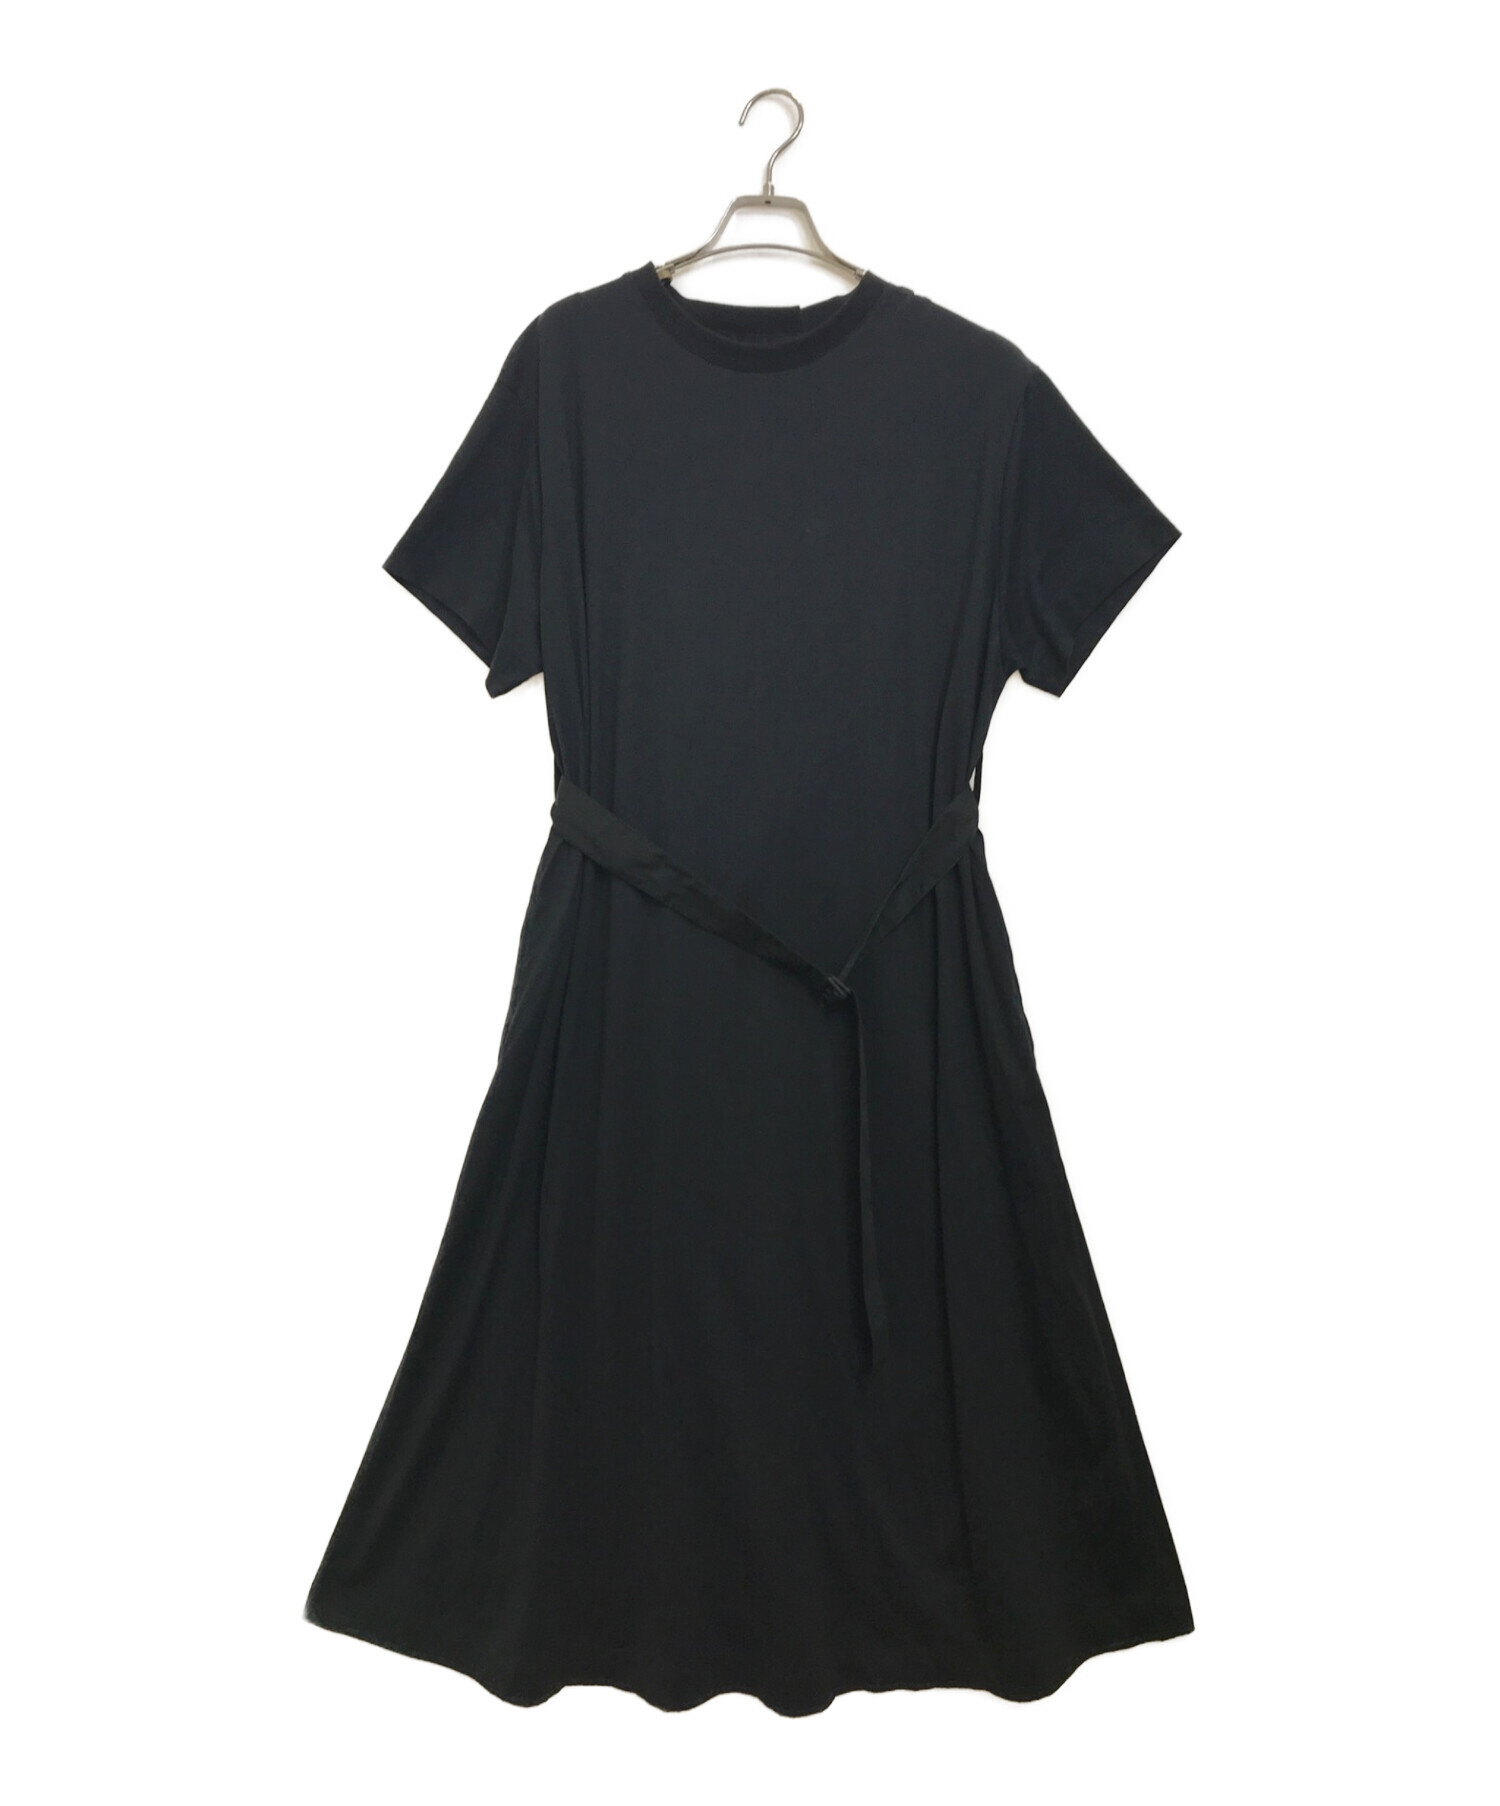 Y-3 W CLASSIC TAILORED SS TEEDRESS ワイスリー